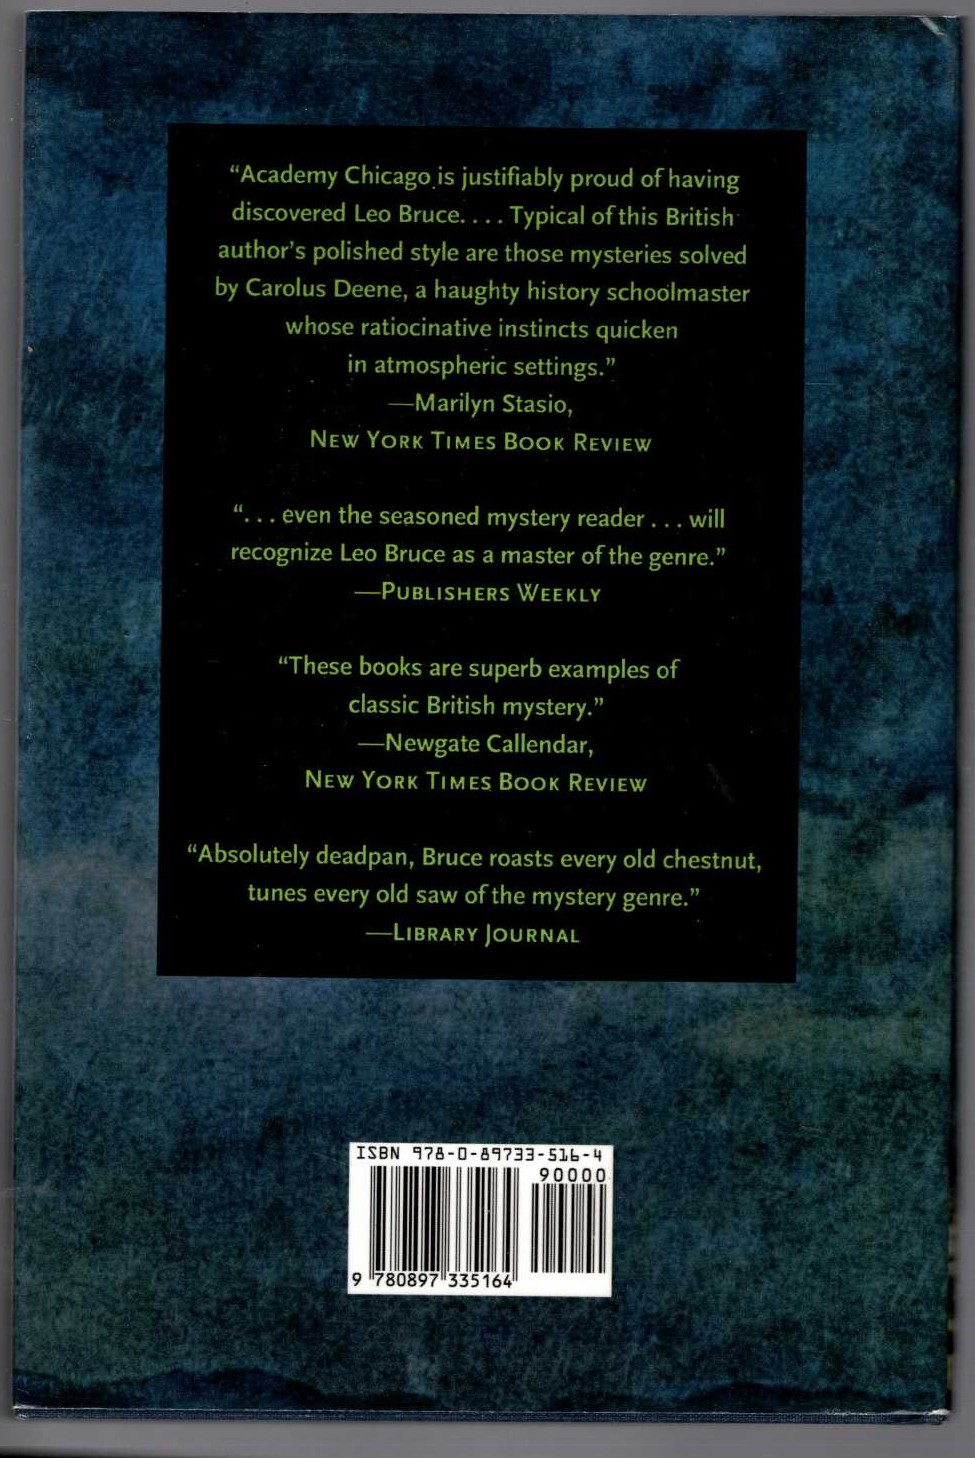 DEATH AT HALLOWS END magnified rear book cover image